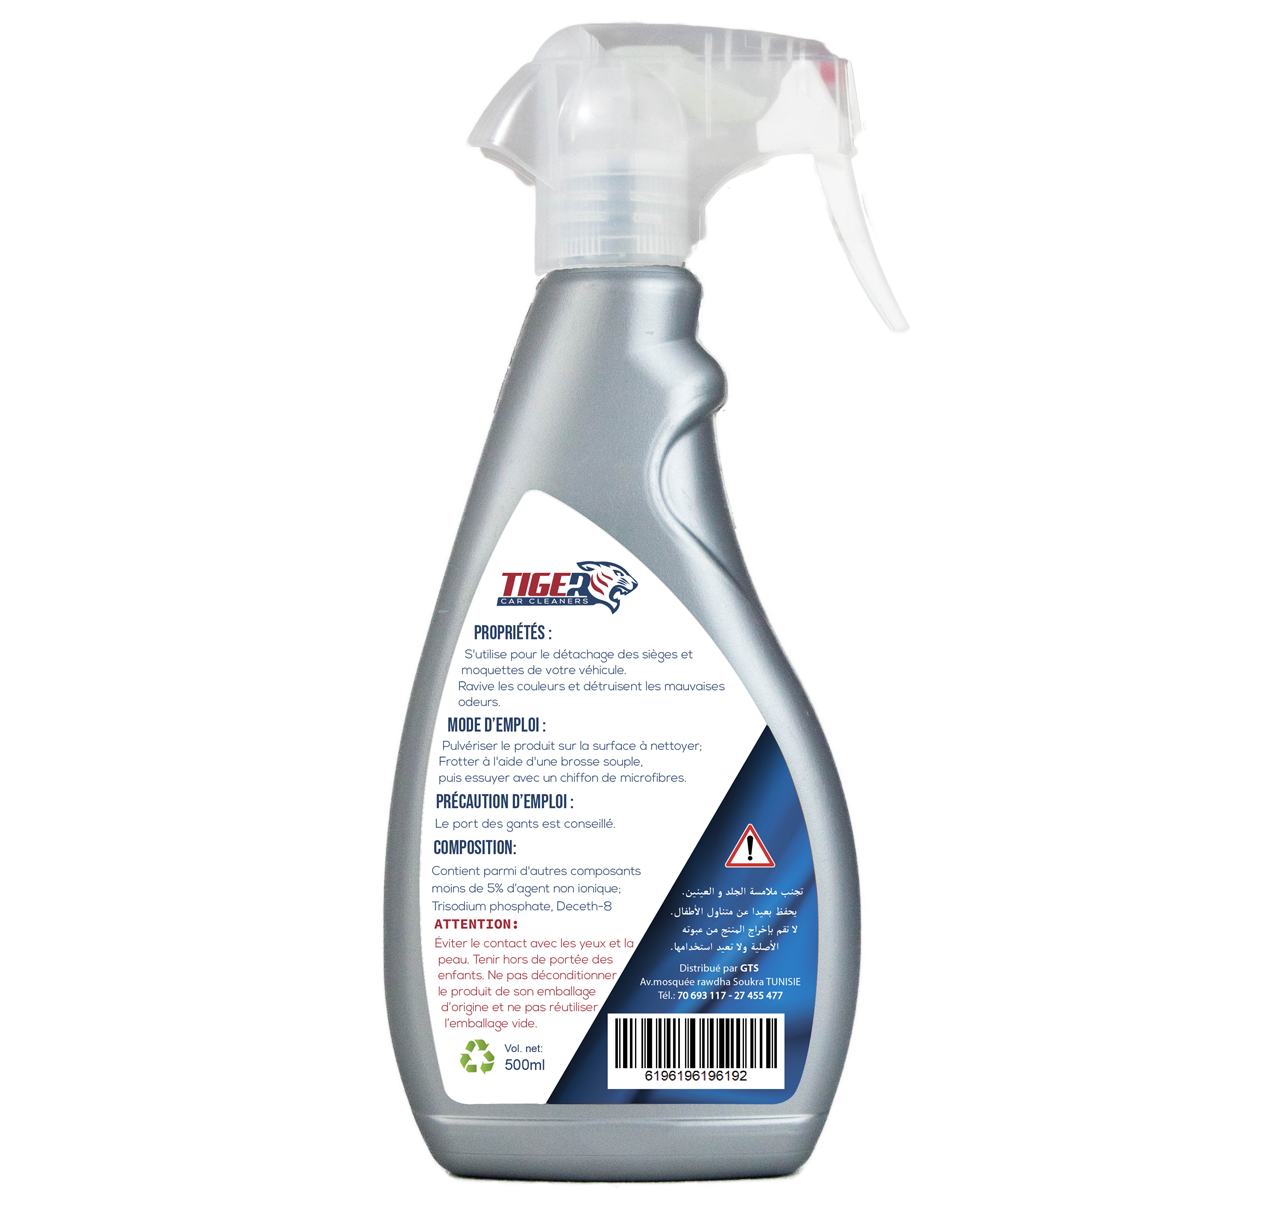 Nettoyant multisurfaces – Tiger Car Cleaners